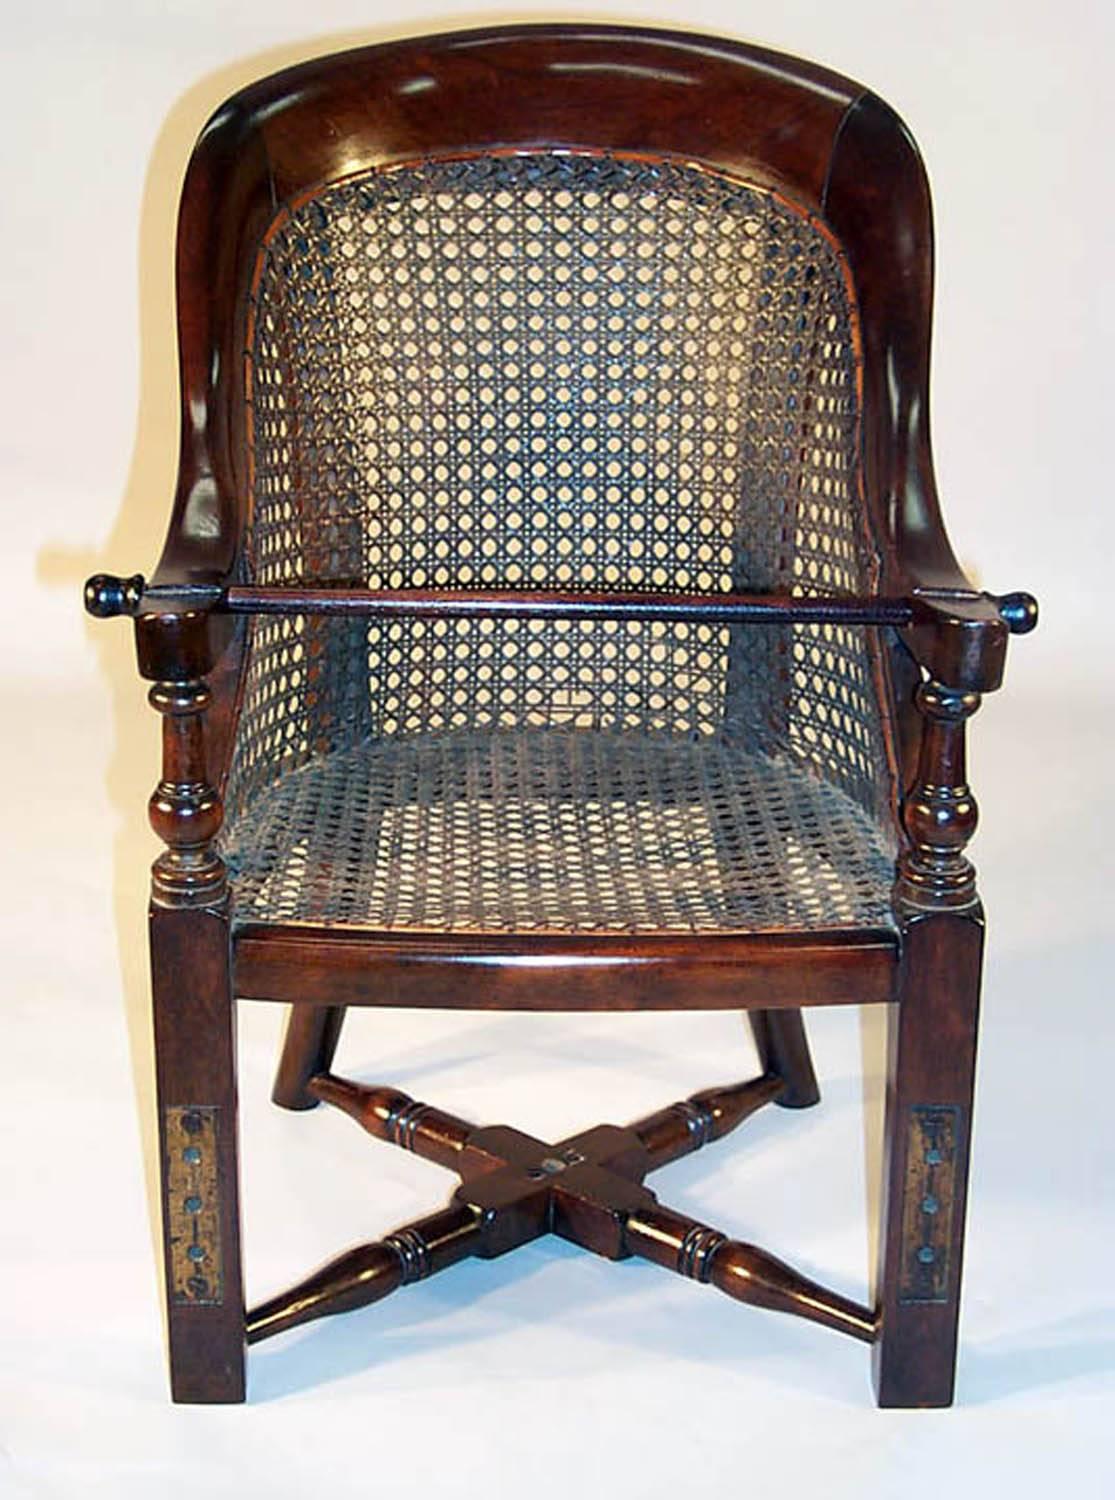 Antique English Regency style child's high chair in mahogany with caned seat and back, with turned cross stretcher on a detachable stand with turned front legs and canted tapered rear legs. The chair and stand can be used independently, late 19th